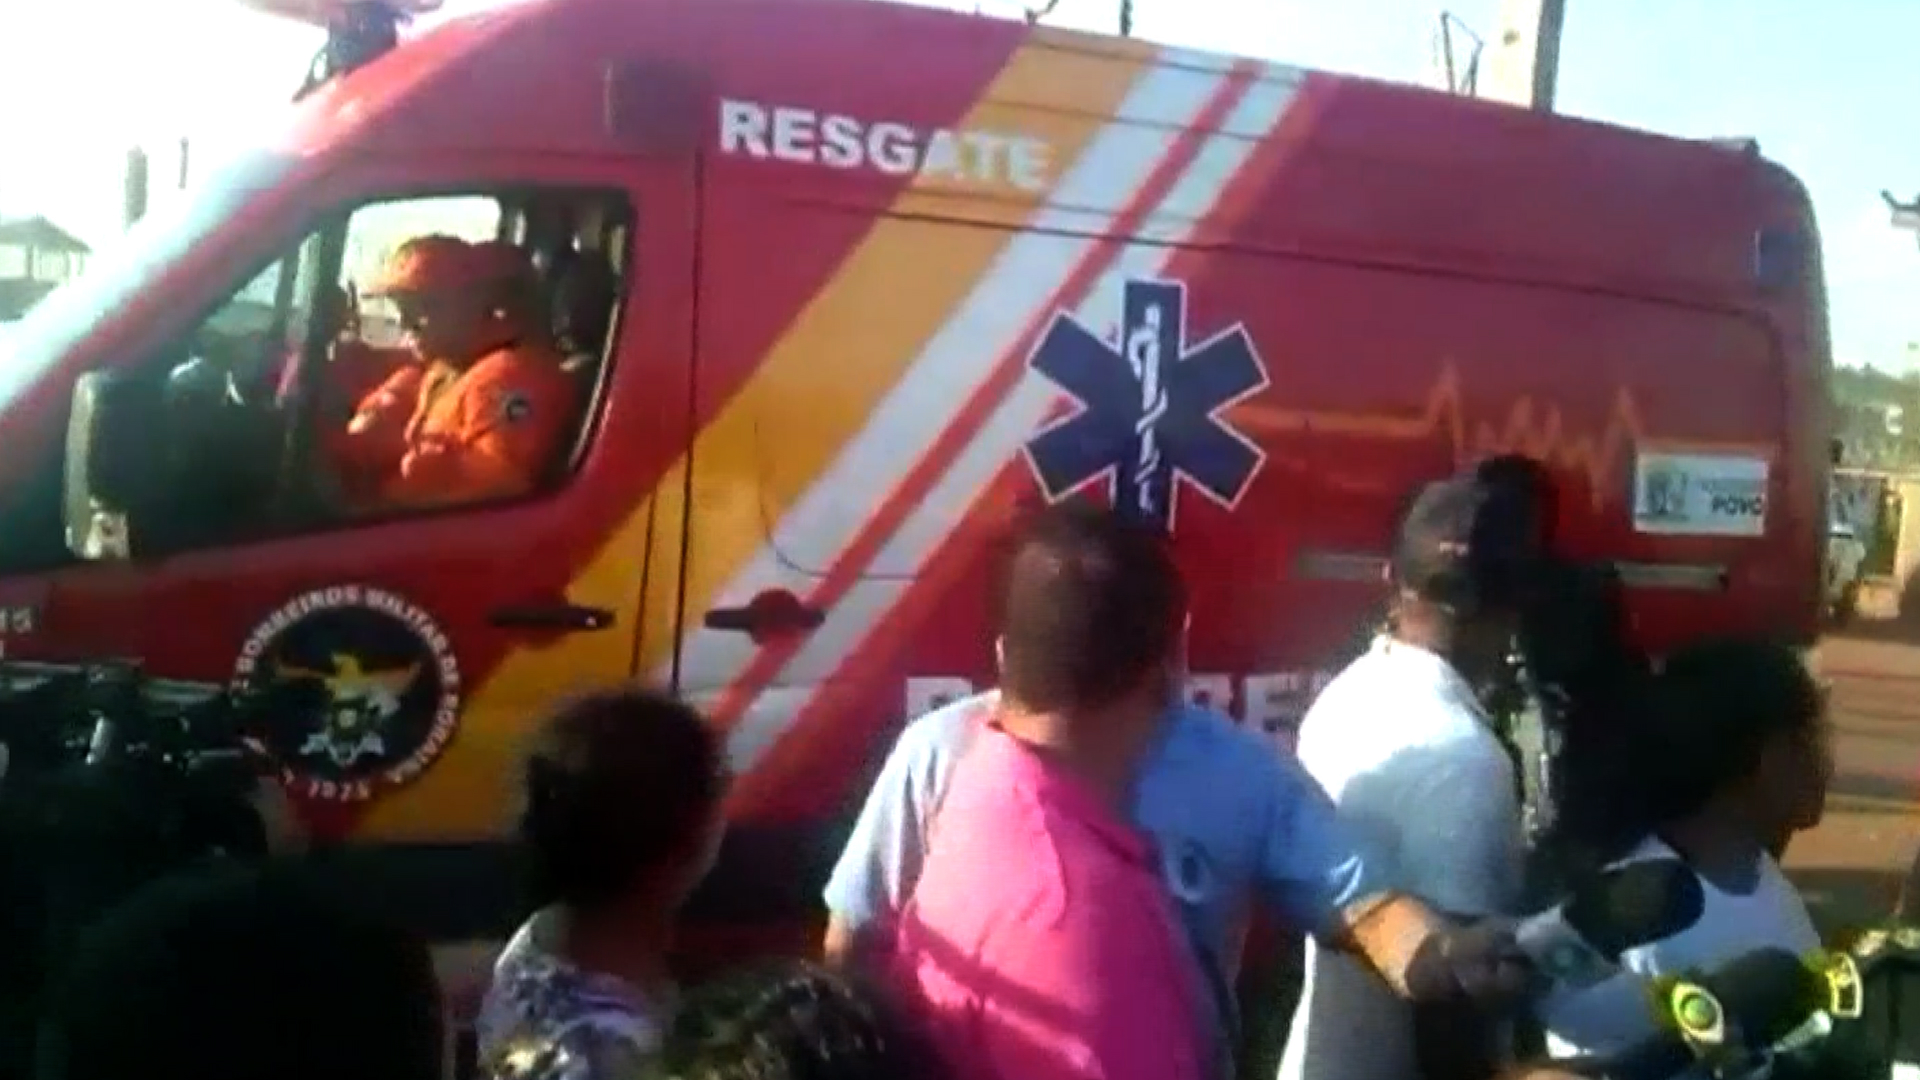 Handout video grab taken from Folha de Boa Vista showing an ambulance outside the Agricola de Monte Cristo prison in Boa Vista, in the Brazilian northern state of Roraima, on October 16, 2016 where at least 10 inmates were killed during clashes between two rival factions. Rioting inmates beheaded their rivals and bodies were burned in an explosion of violence in two Brazilian jails that left at least 18 people dead, authorities said on Monday. Prisoners also took women visitors hostage, a regional official told Brazilian television. It was the latest eruption of gruesome violence to hit the country's underfunded and overcrowded prison system.  / AFP PHOTO / FOLHA DE BOA VISTA / HO / RESTRICTED TO EDITORIAL USE - MANDATORY CREDIT "AFP PHOTO / FOLHA DE BOA VISTA / HO " - NO MARKETING NO ADVERTISING CAMPAIGNS - DISTRIBUTED AS A SERVICE TO CLIENTS - BEST QUALITY AVAILABLE